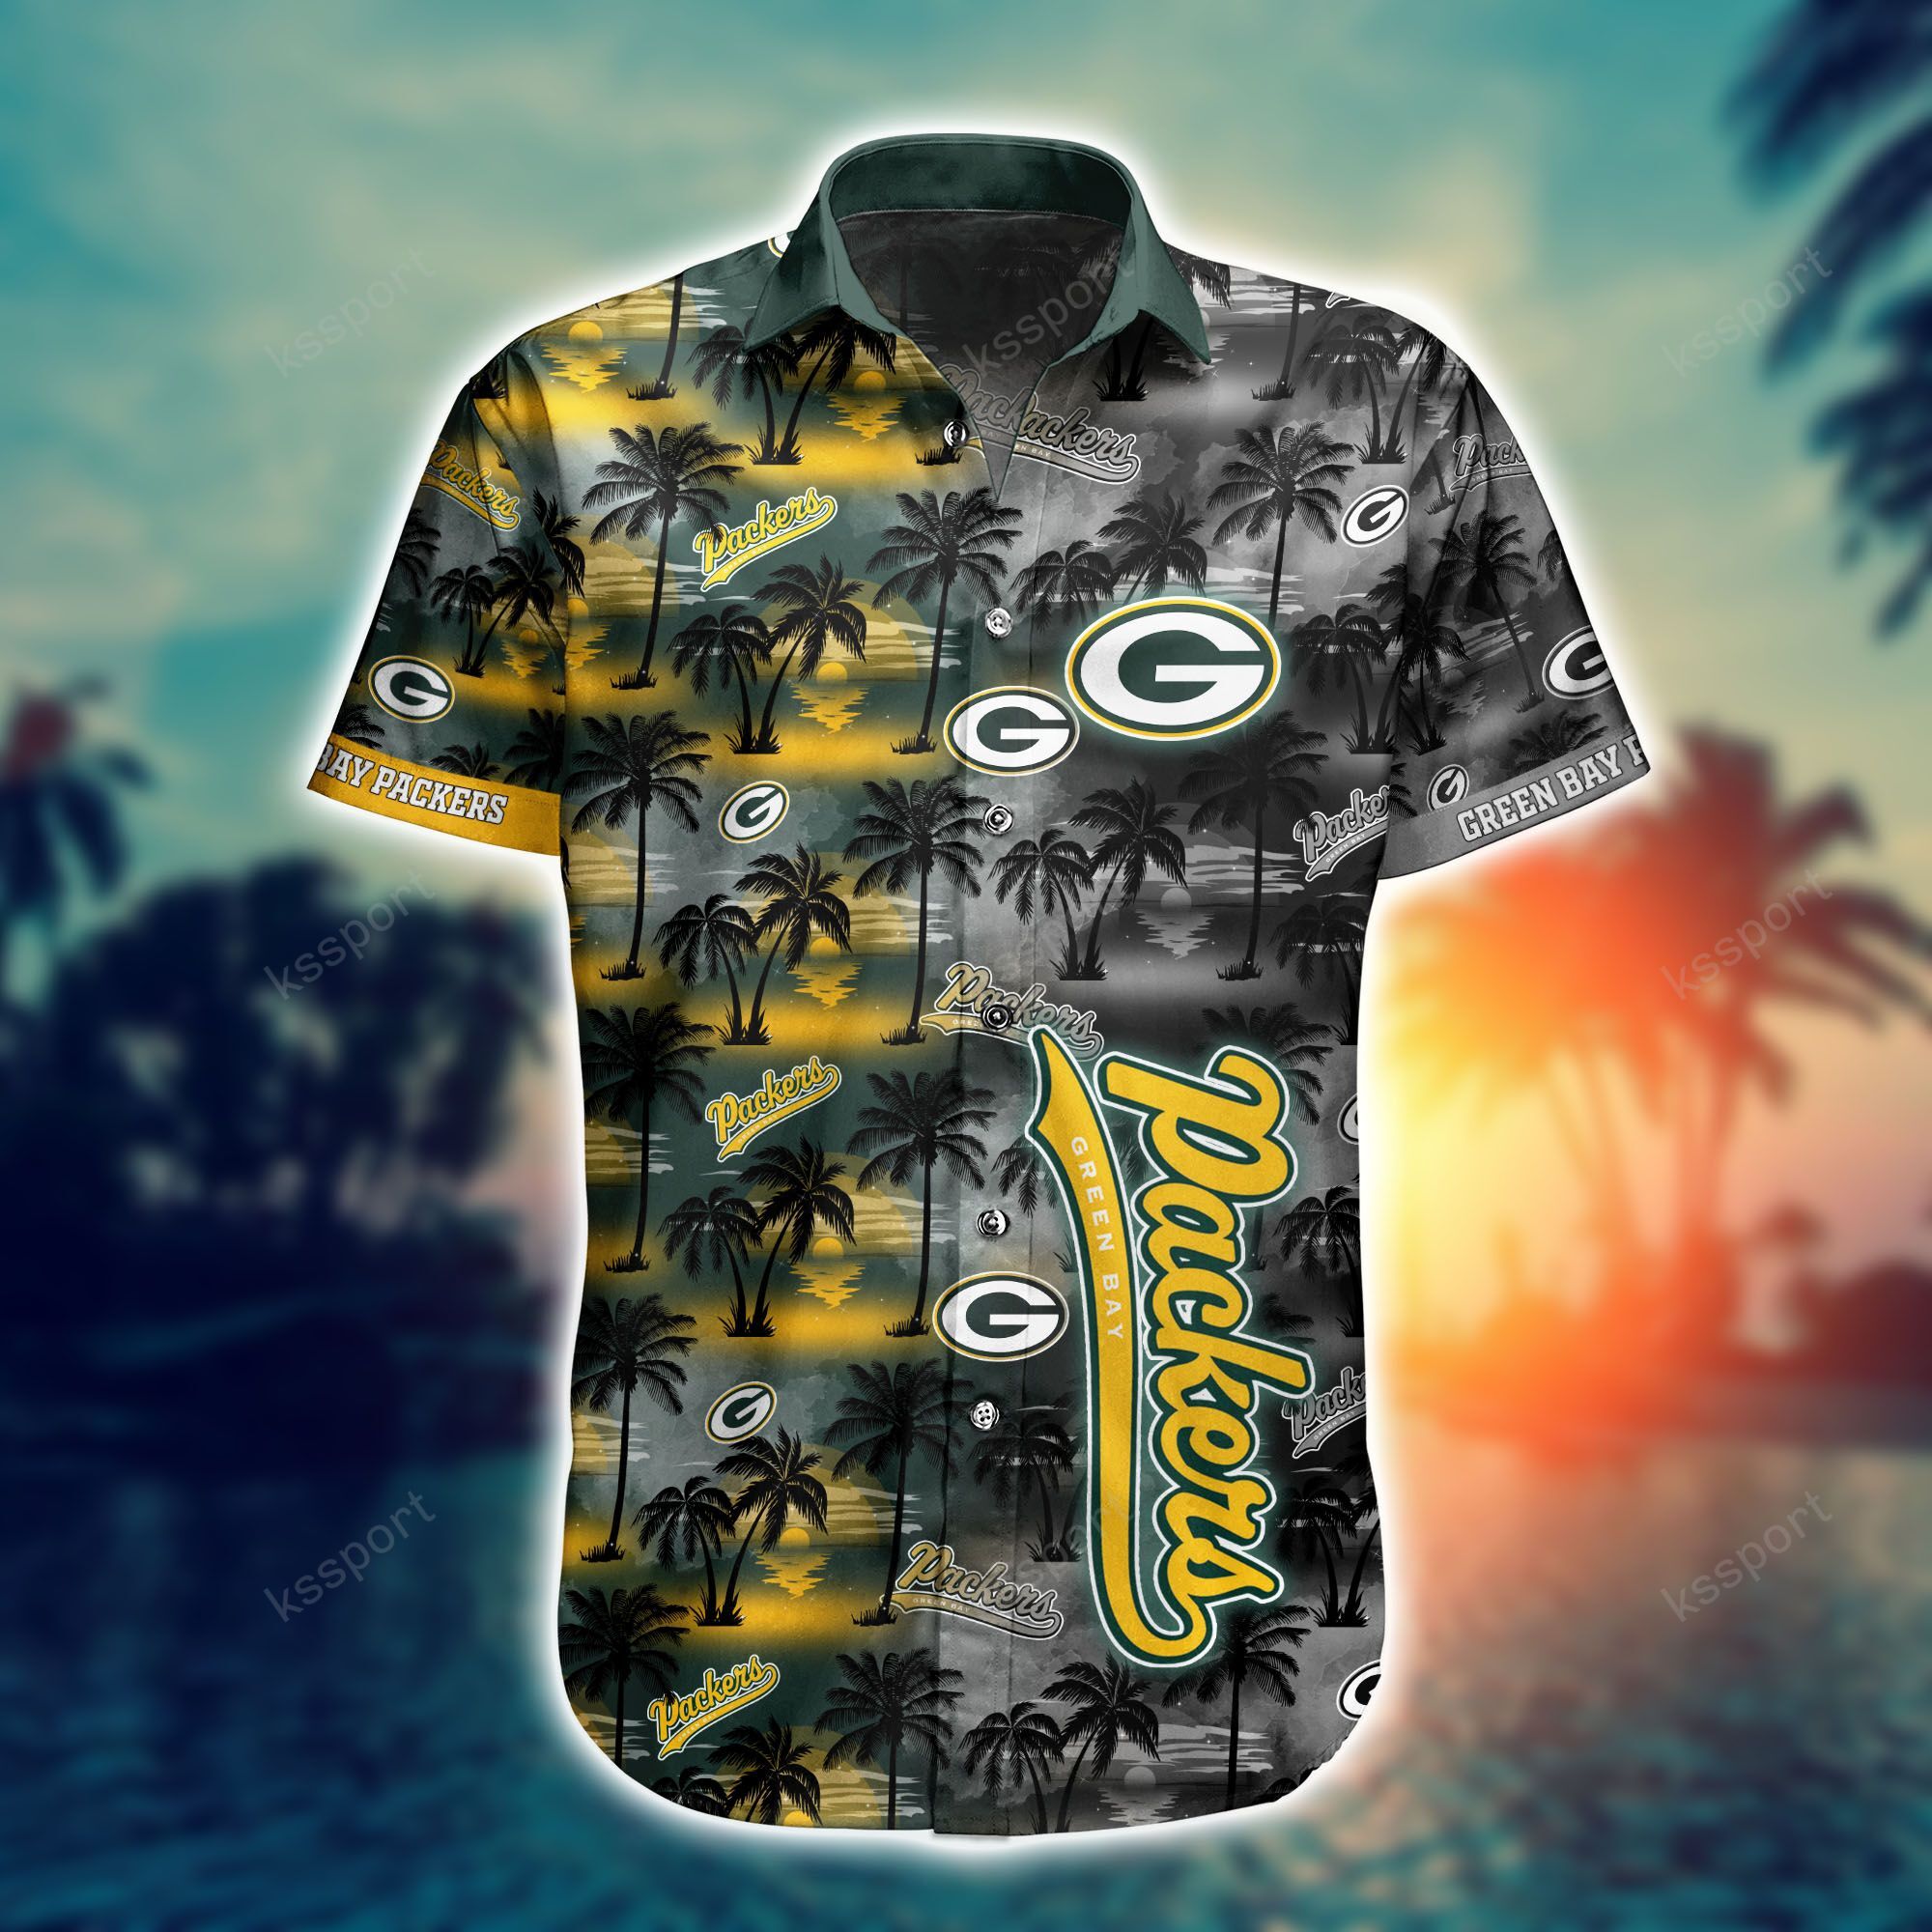 Top cool Hawaiian shirt 2022 - Make sure you get yours today before they run out! 202